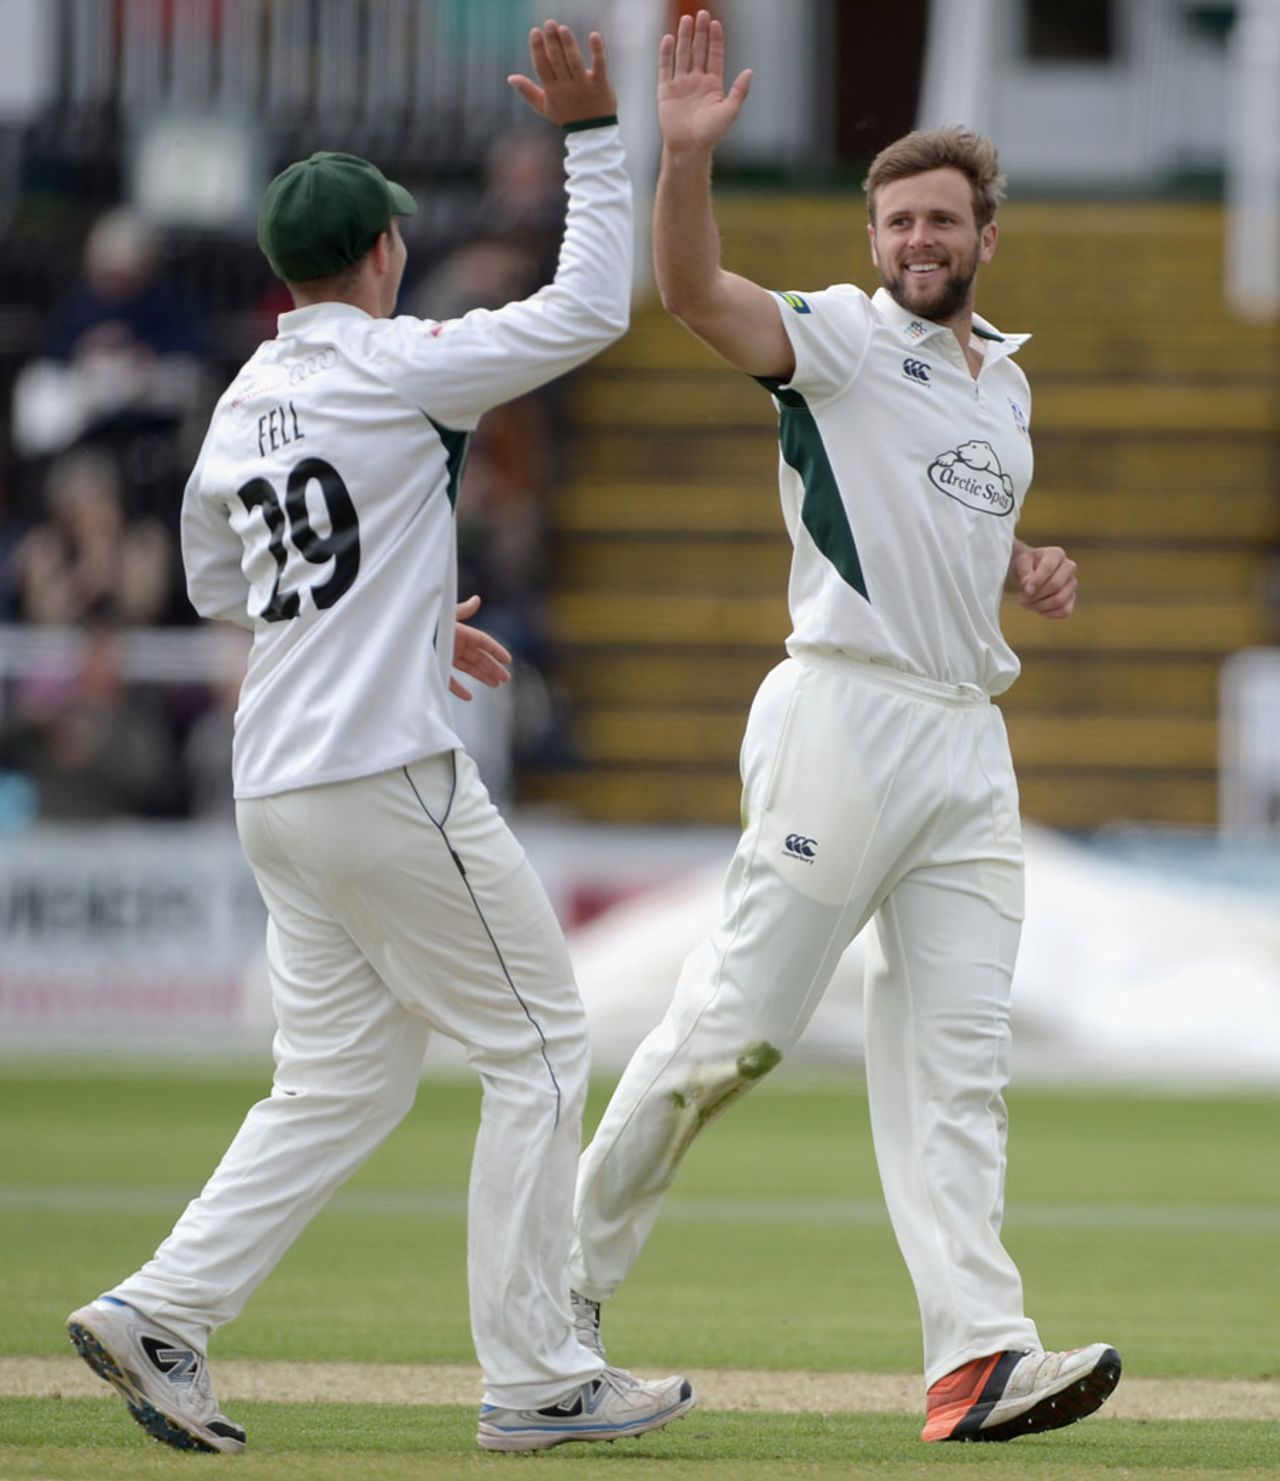 Ross Whiteley was in the wickets, Worcestershire v New Zealanders, Tour match, New Road, 2nd day, May 15, 2015